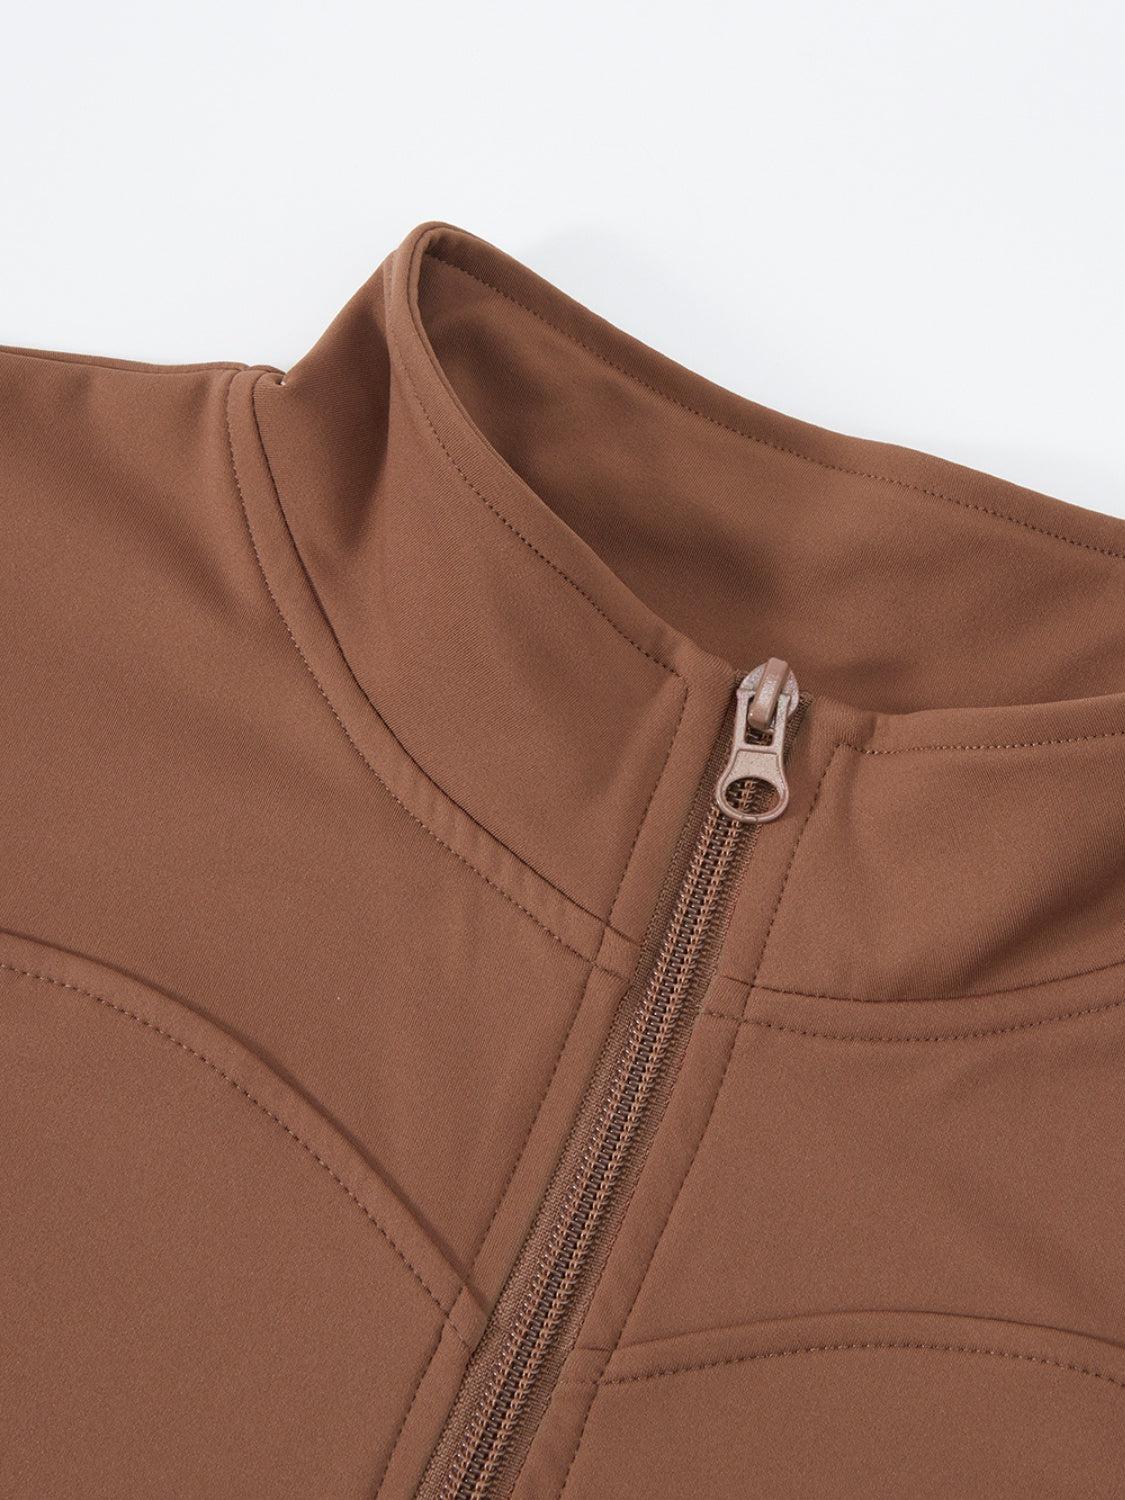 a close up of a brown jacket with a zipper